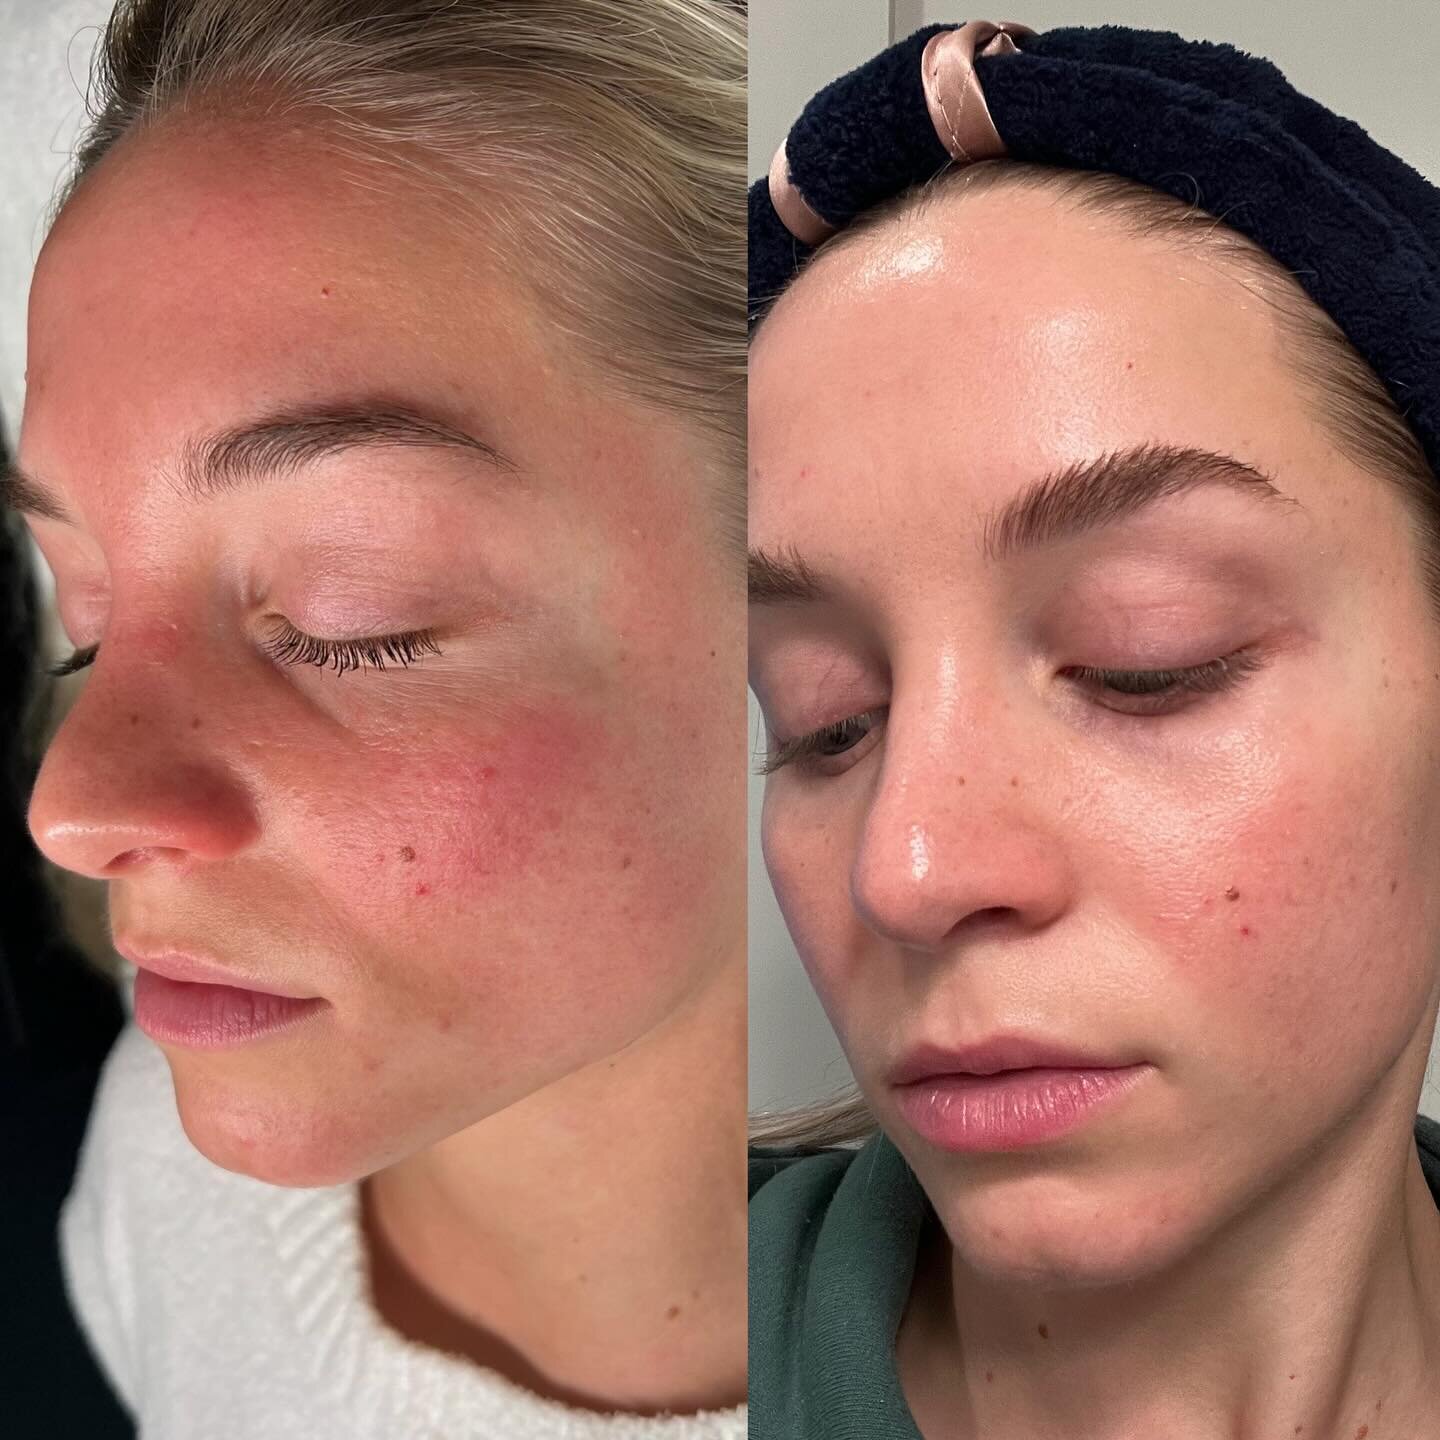 Bye Bye Rosacea ✌🏼

Her routine:
⭐️Ultra gentle cleanser
⭐️Exfoliating peel pads
⭐️Mystro- #1 product for rosacea 
⭐️Even tone correcting serum
⭐️Trio Rebalancing moisture treatment 
⭐️SPF 70 sheer
⭐️Sulfur spot treatment as needed 
⭐️Face reality s